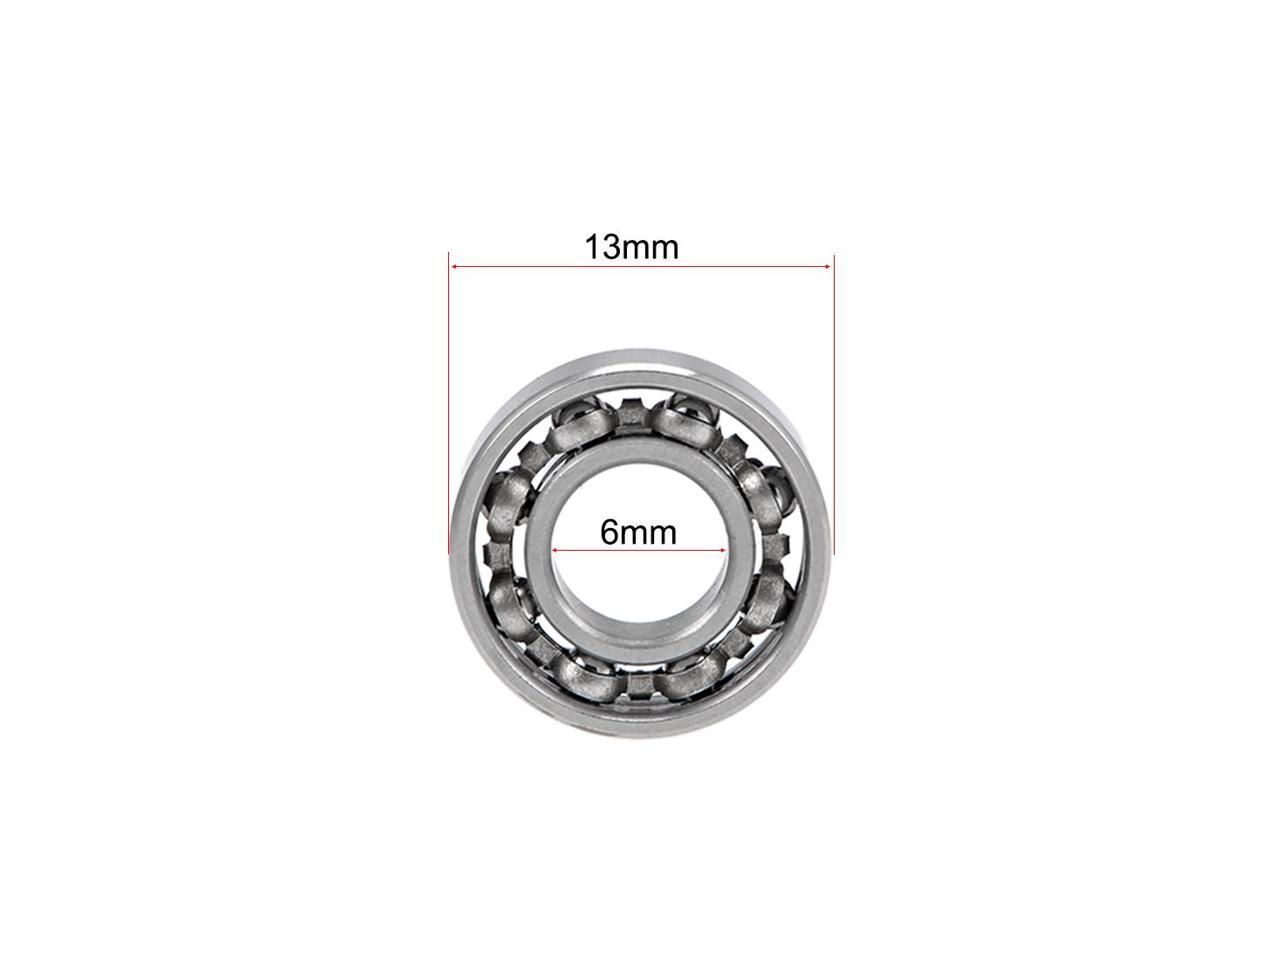 2x 686-2RS Ball Bearing 13mm x 6mm x 3.5mm Free Shipping 2RS RS Rubber 